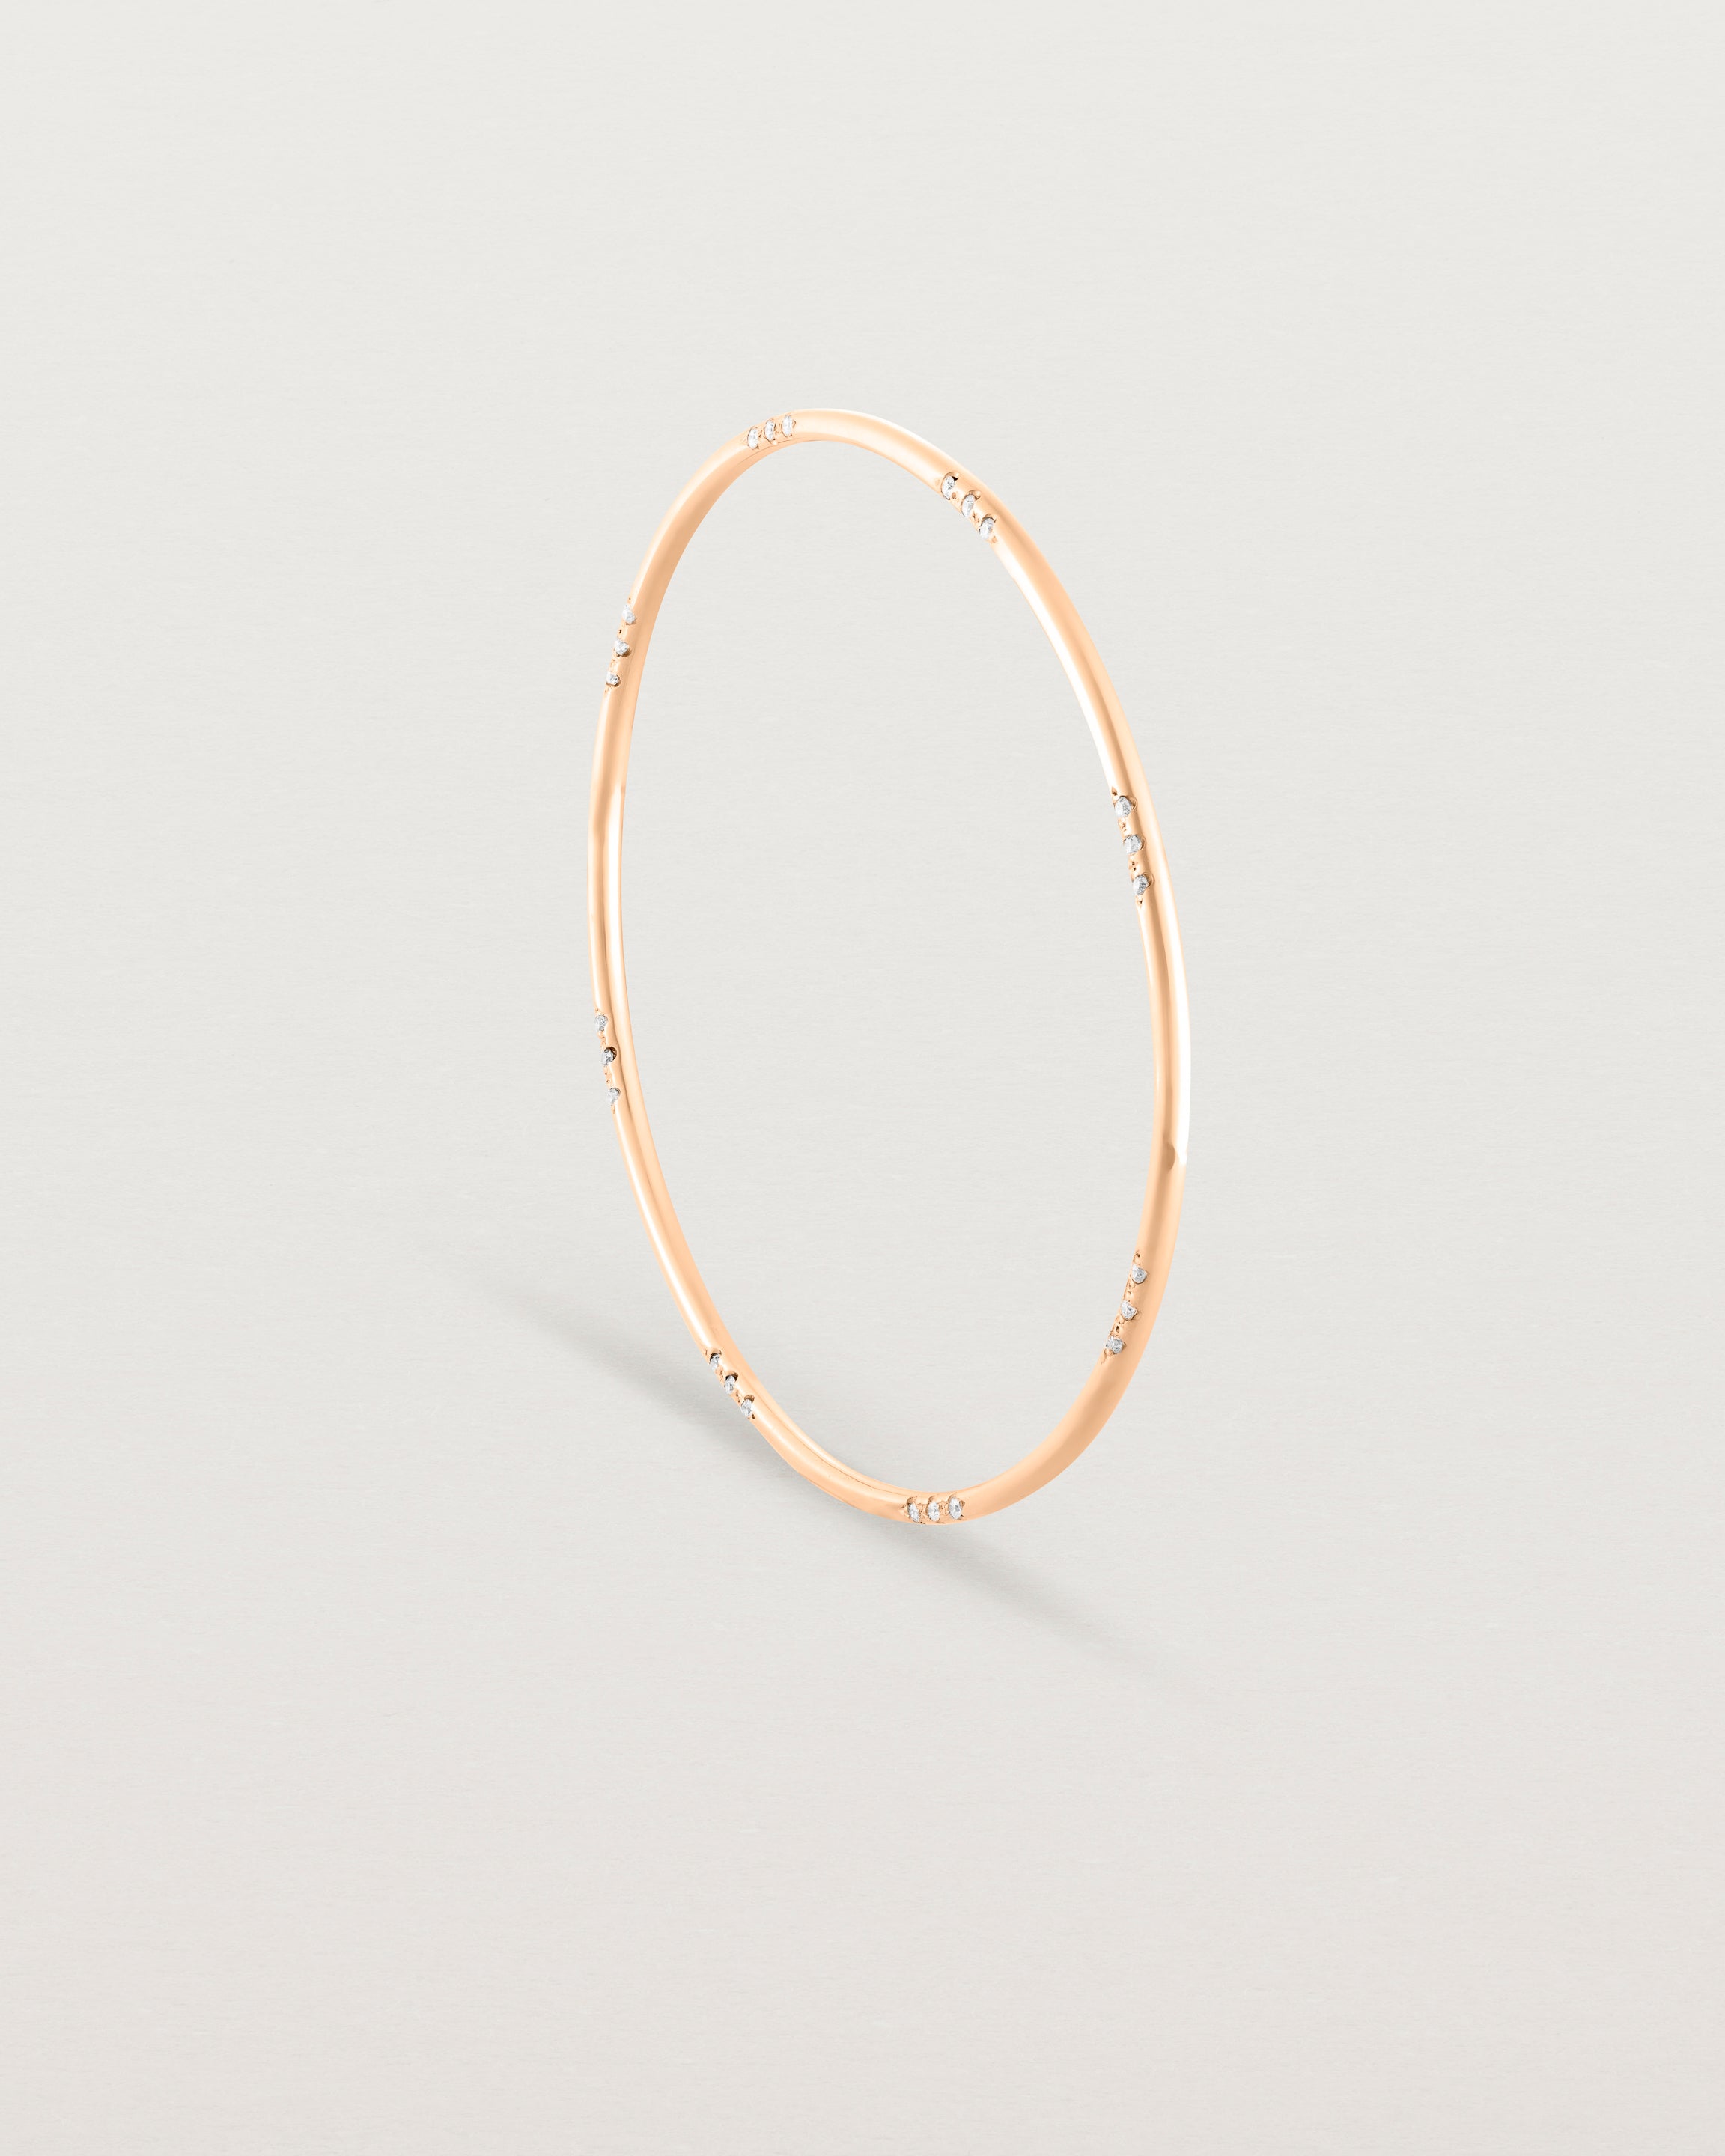 Standing view of the Cascade Oval Bangle | Diamonds | Rose Gold